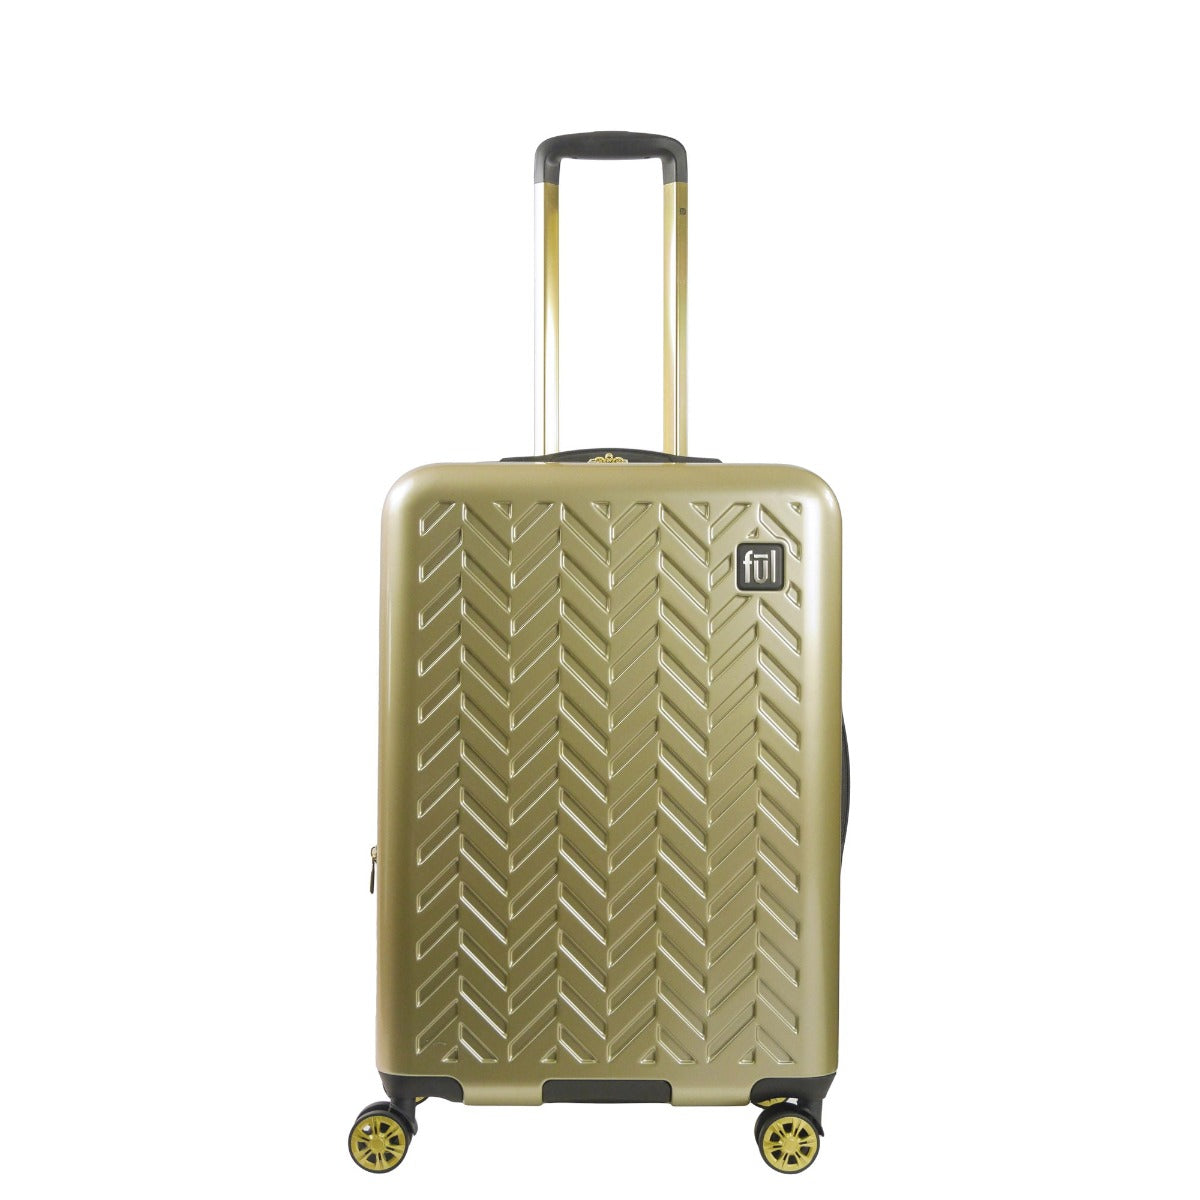 Ful Groove 27 inch hardside spinner suitcase checked gold luggage black details